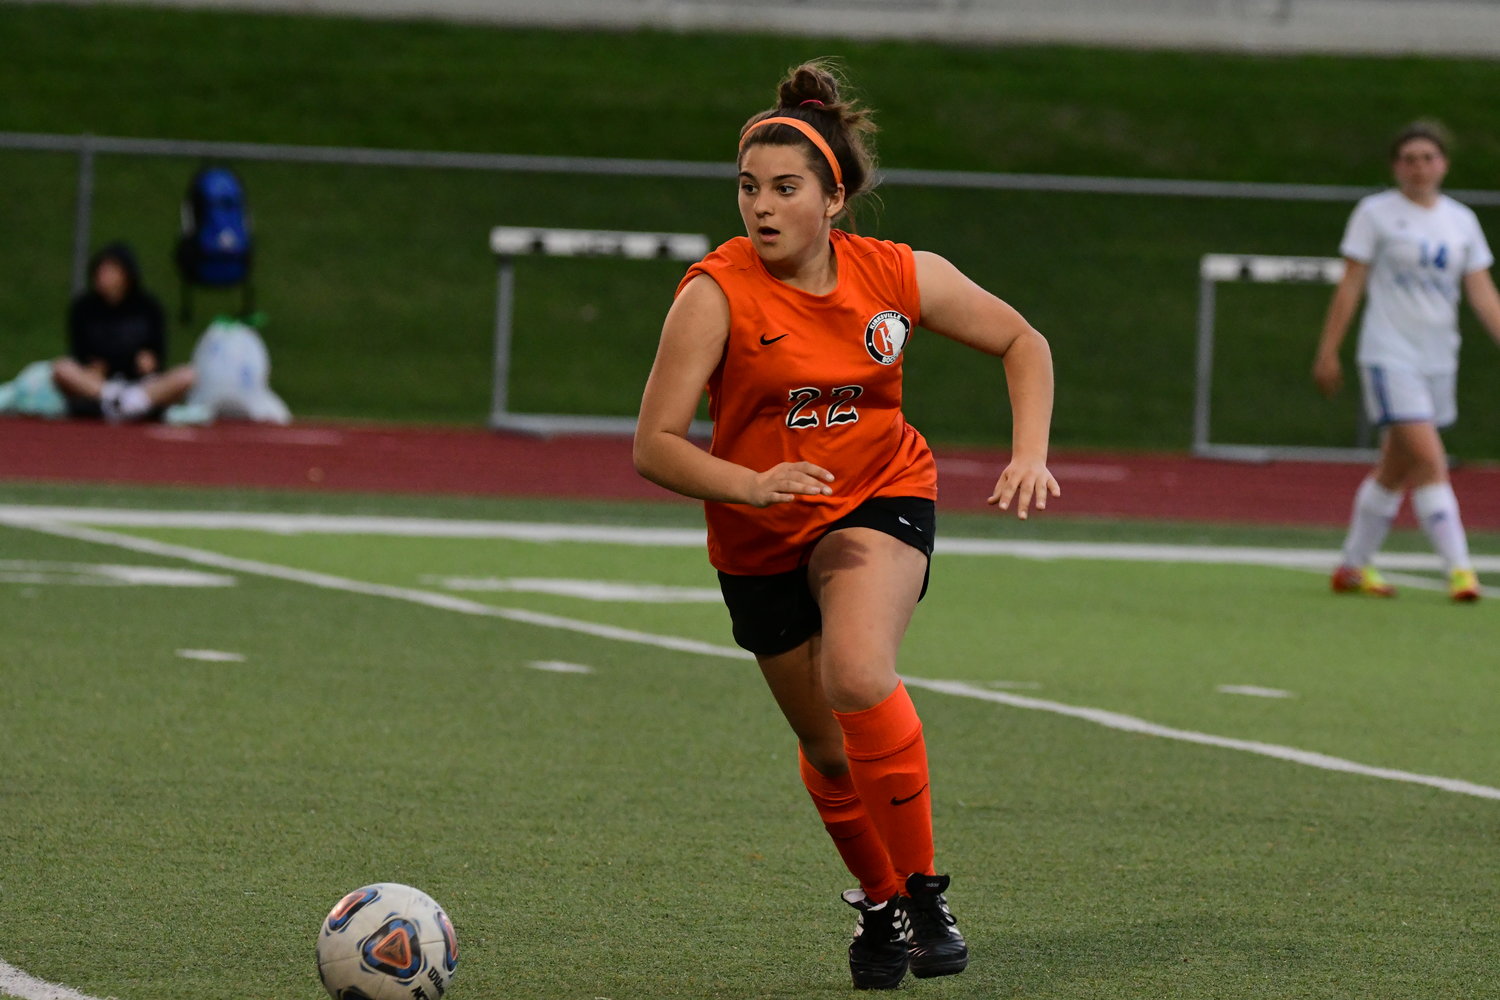 Photos from the Kirksville girls soccer team’s 3-2 overtime win against Moberly on Thursday, April 21, 2022.